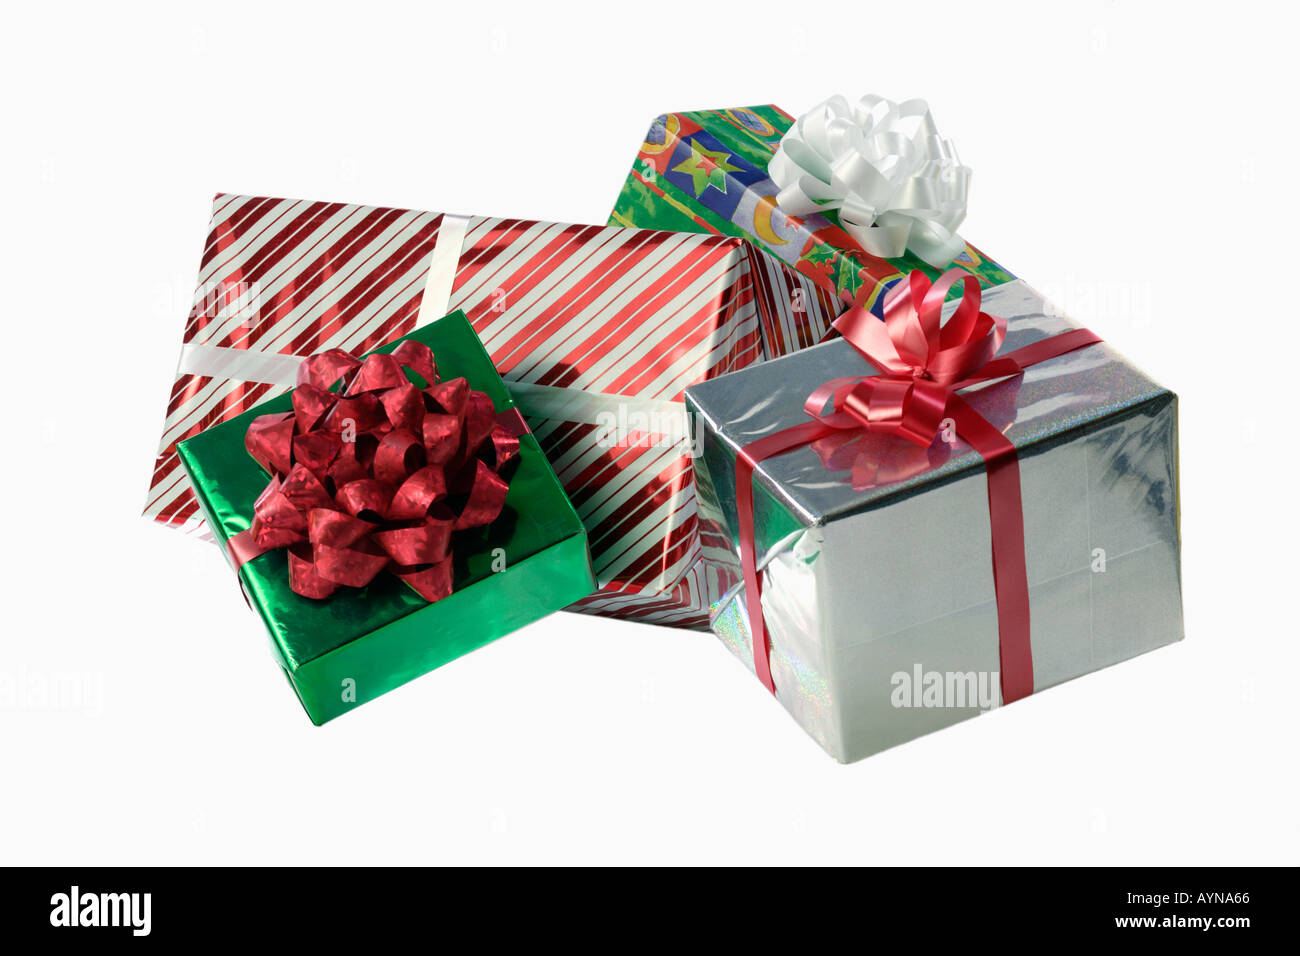 Still life of gift wrapped presents with an ornate bow isolated on a white background Stock Photo